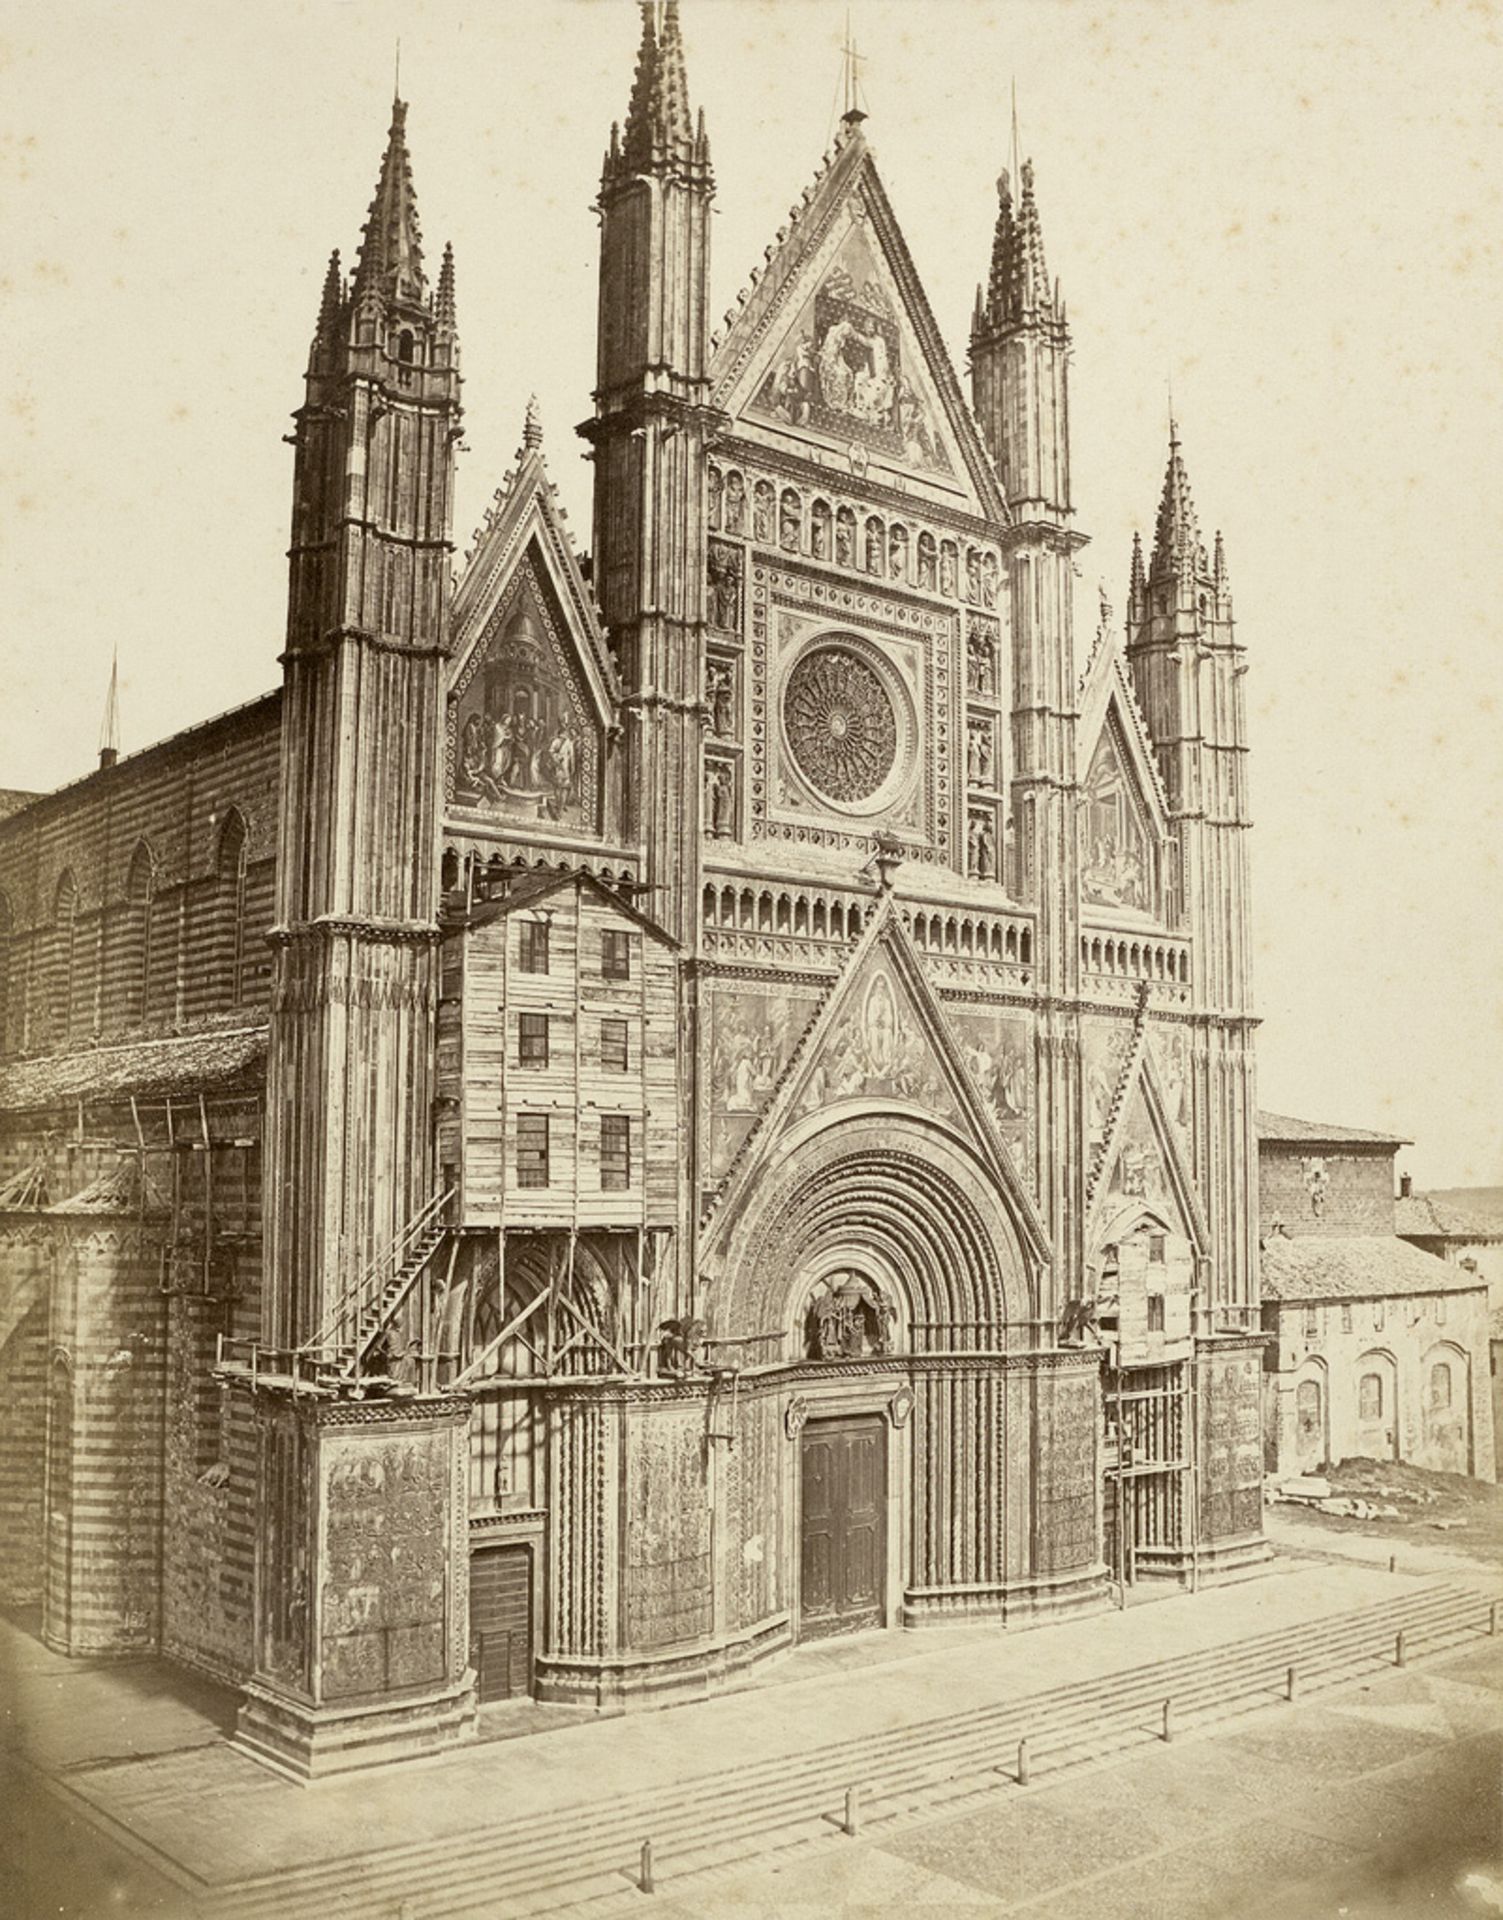 Anderson, James: View of Orvieto cathedral